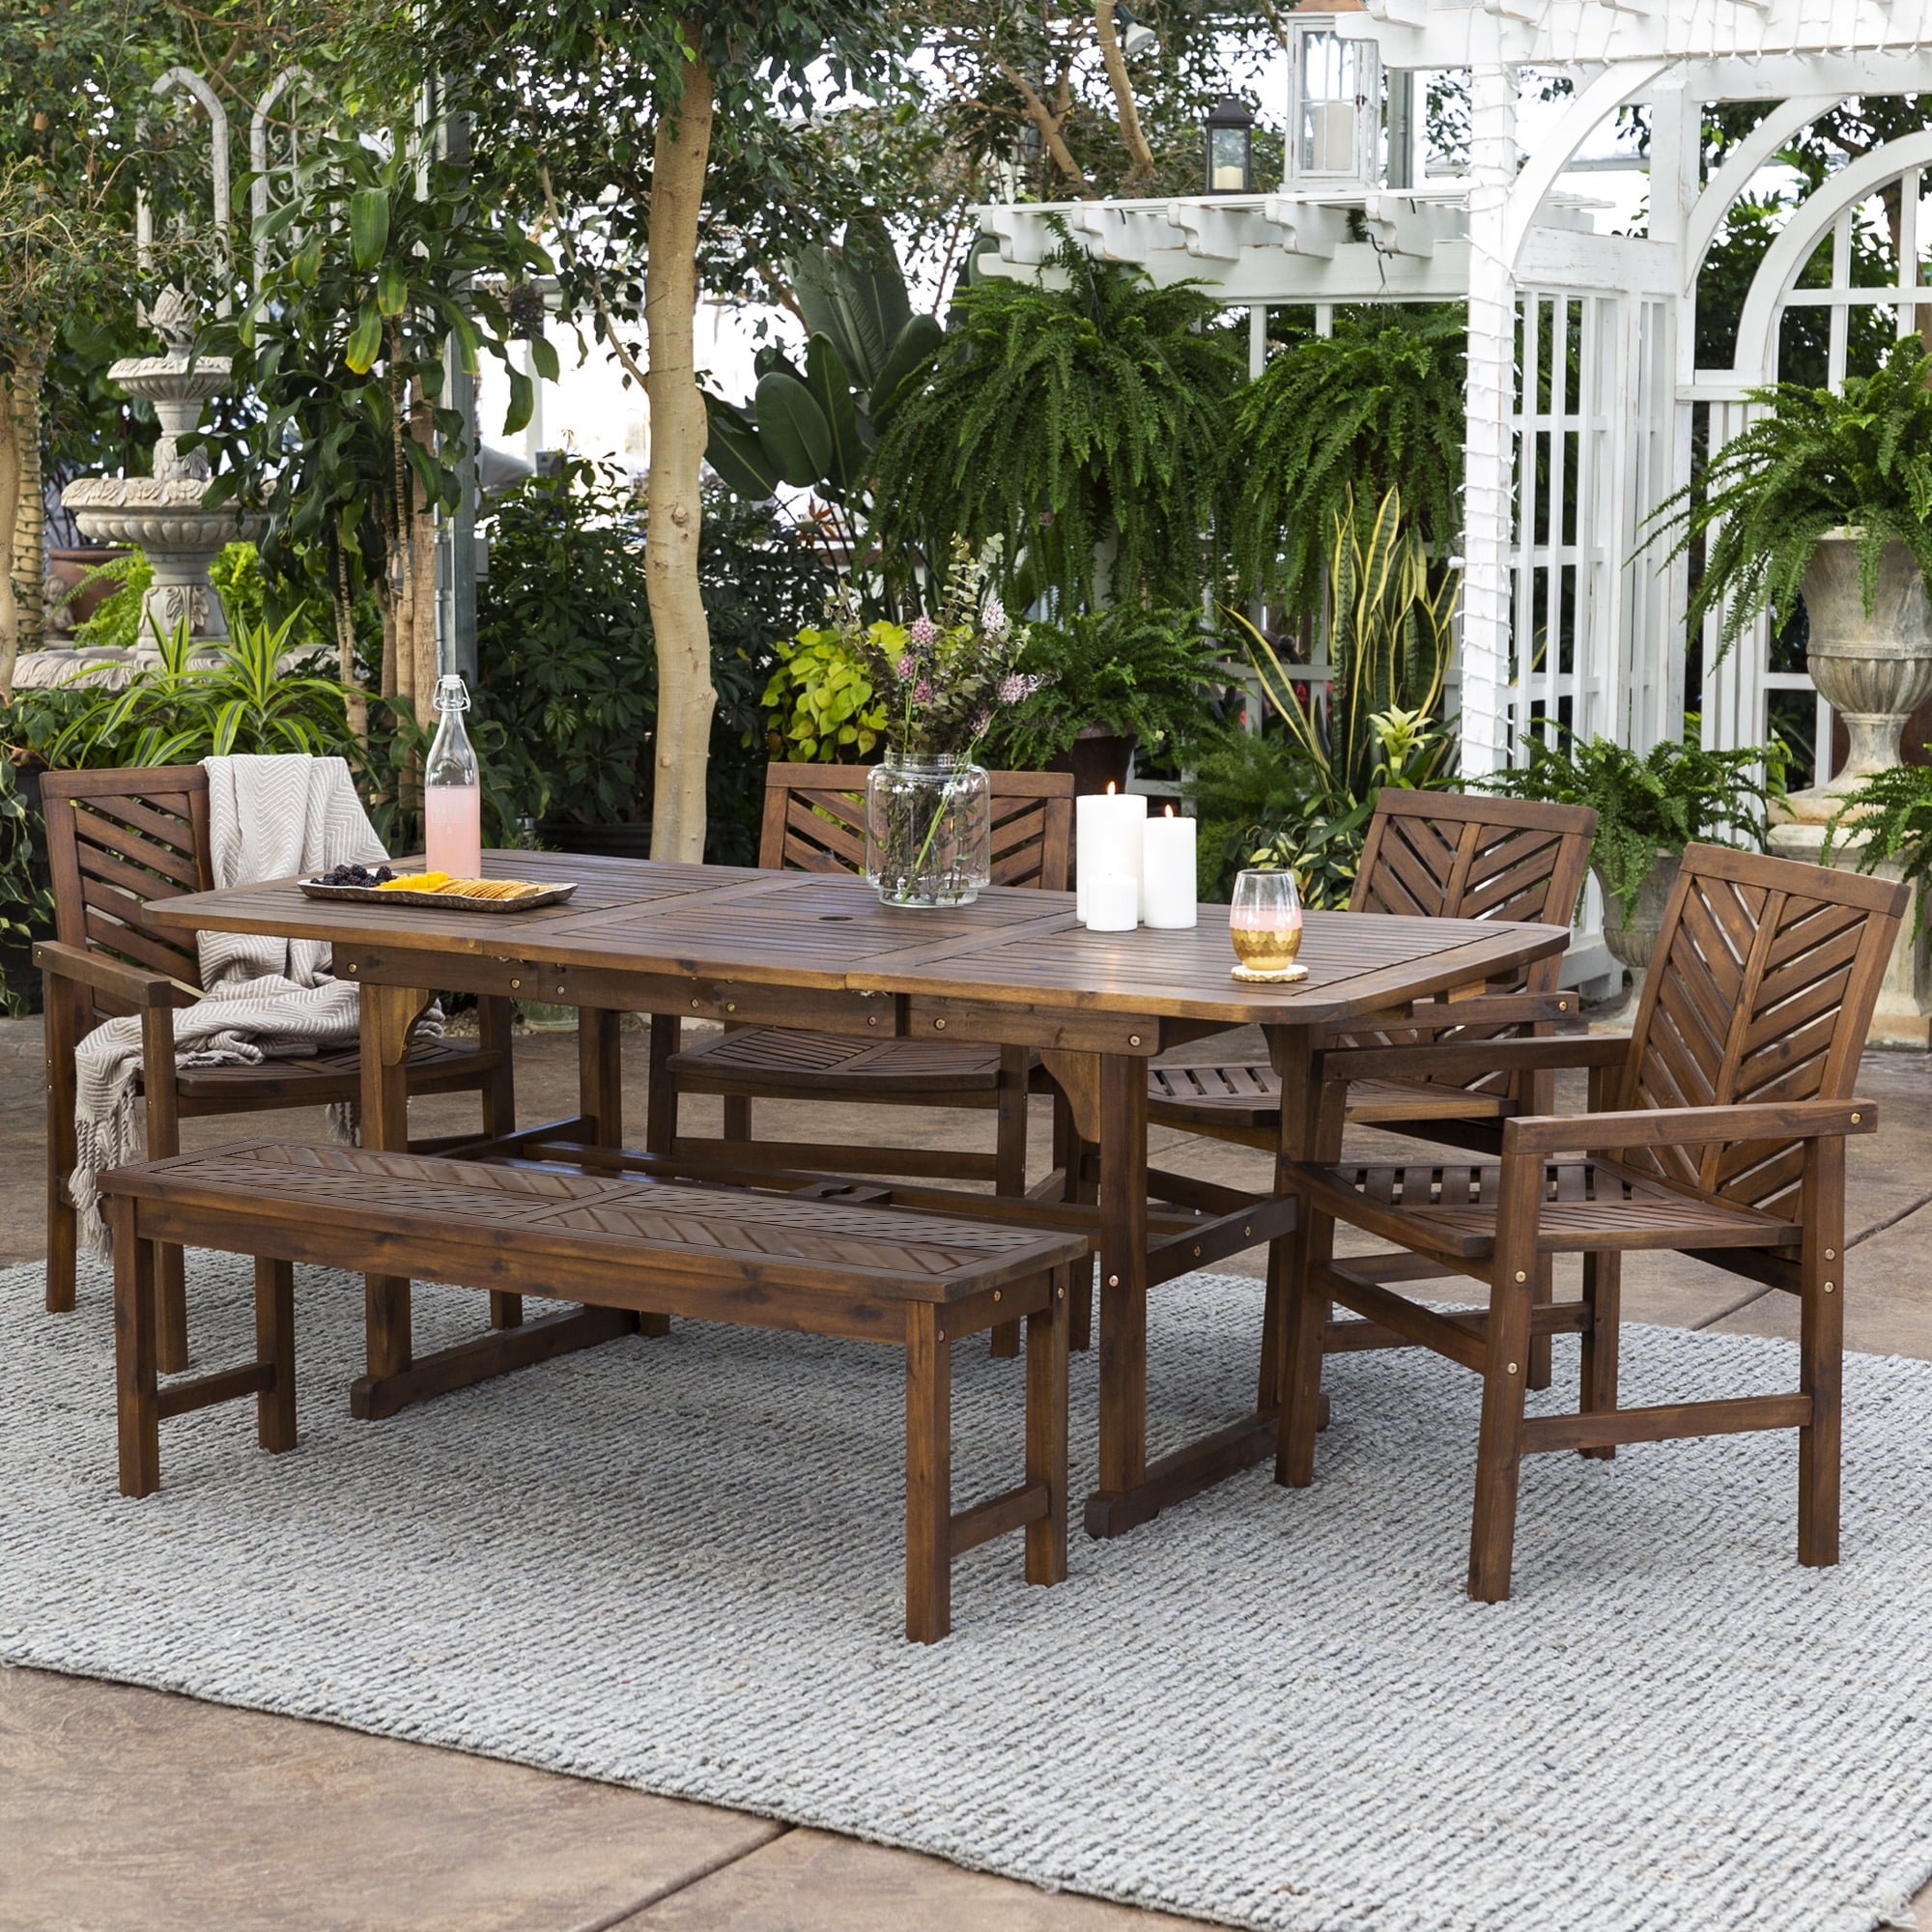 Extendable Outdoor Patio Dining Set, Outdoor Dining Room Sets For 6